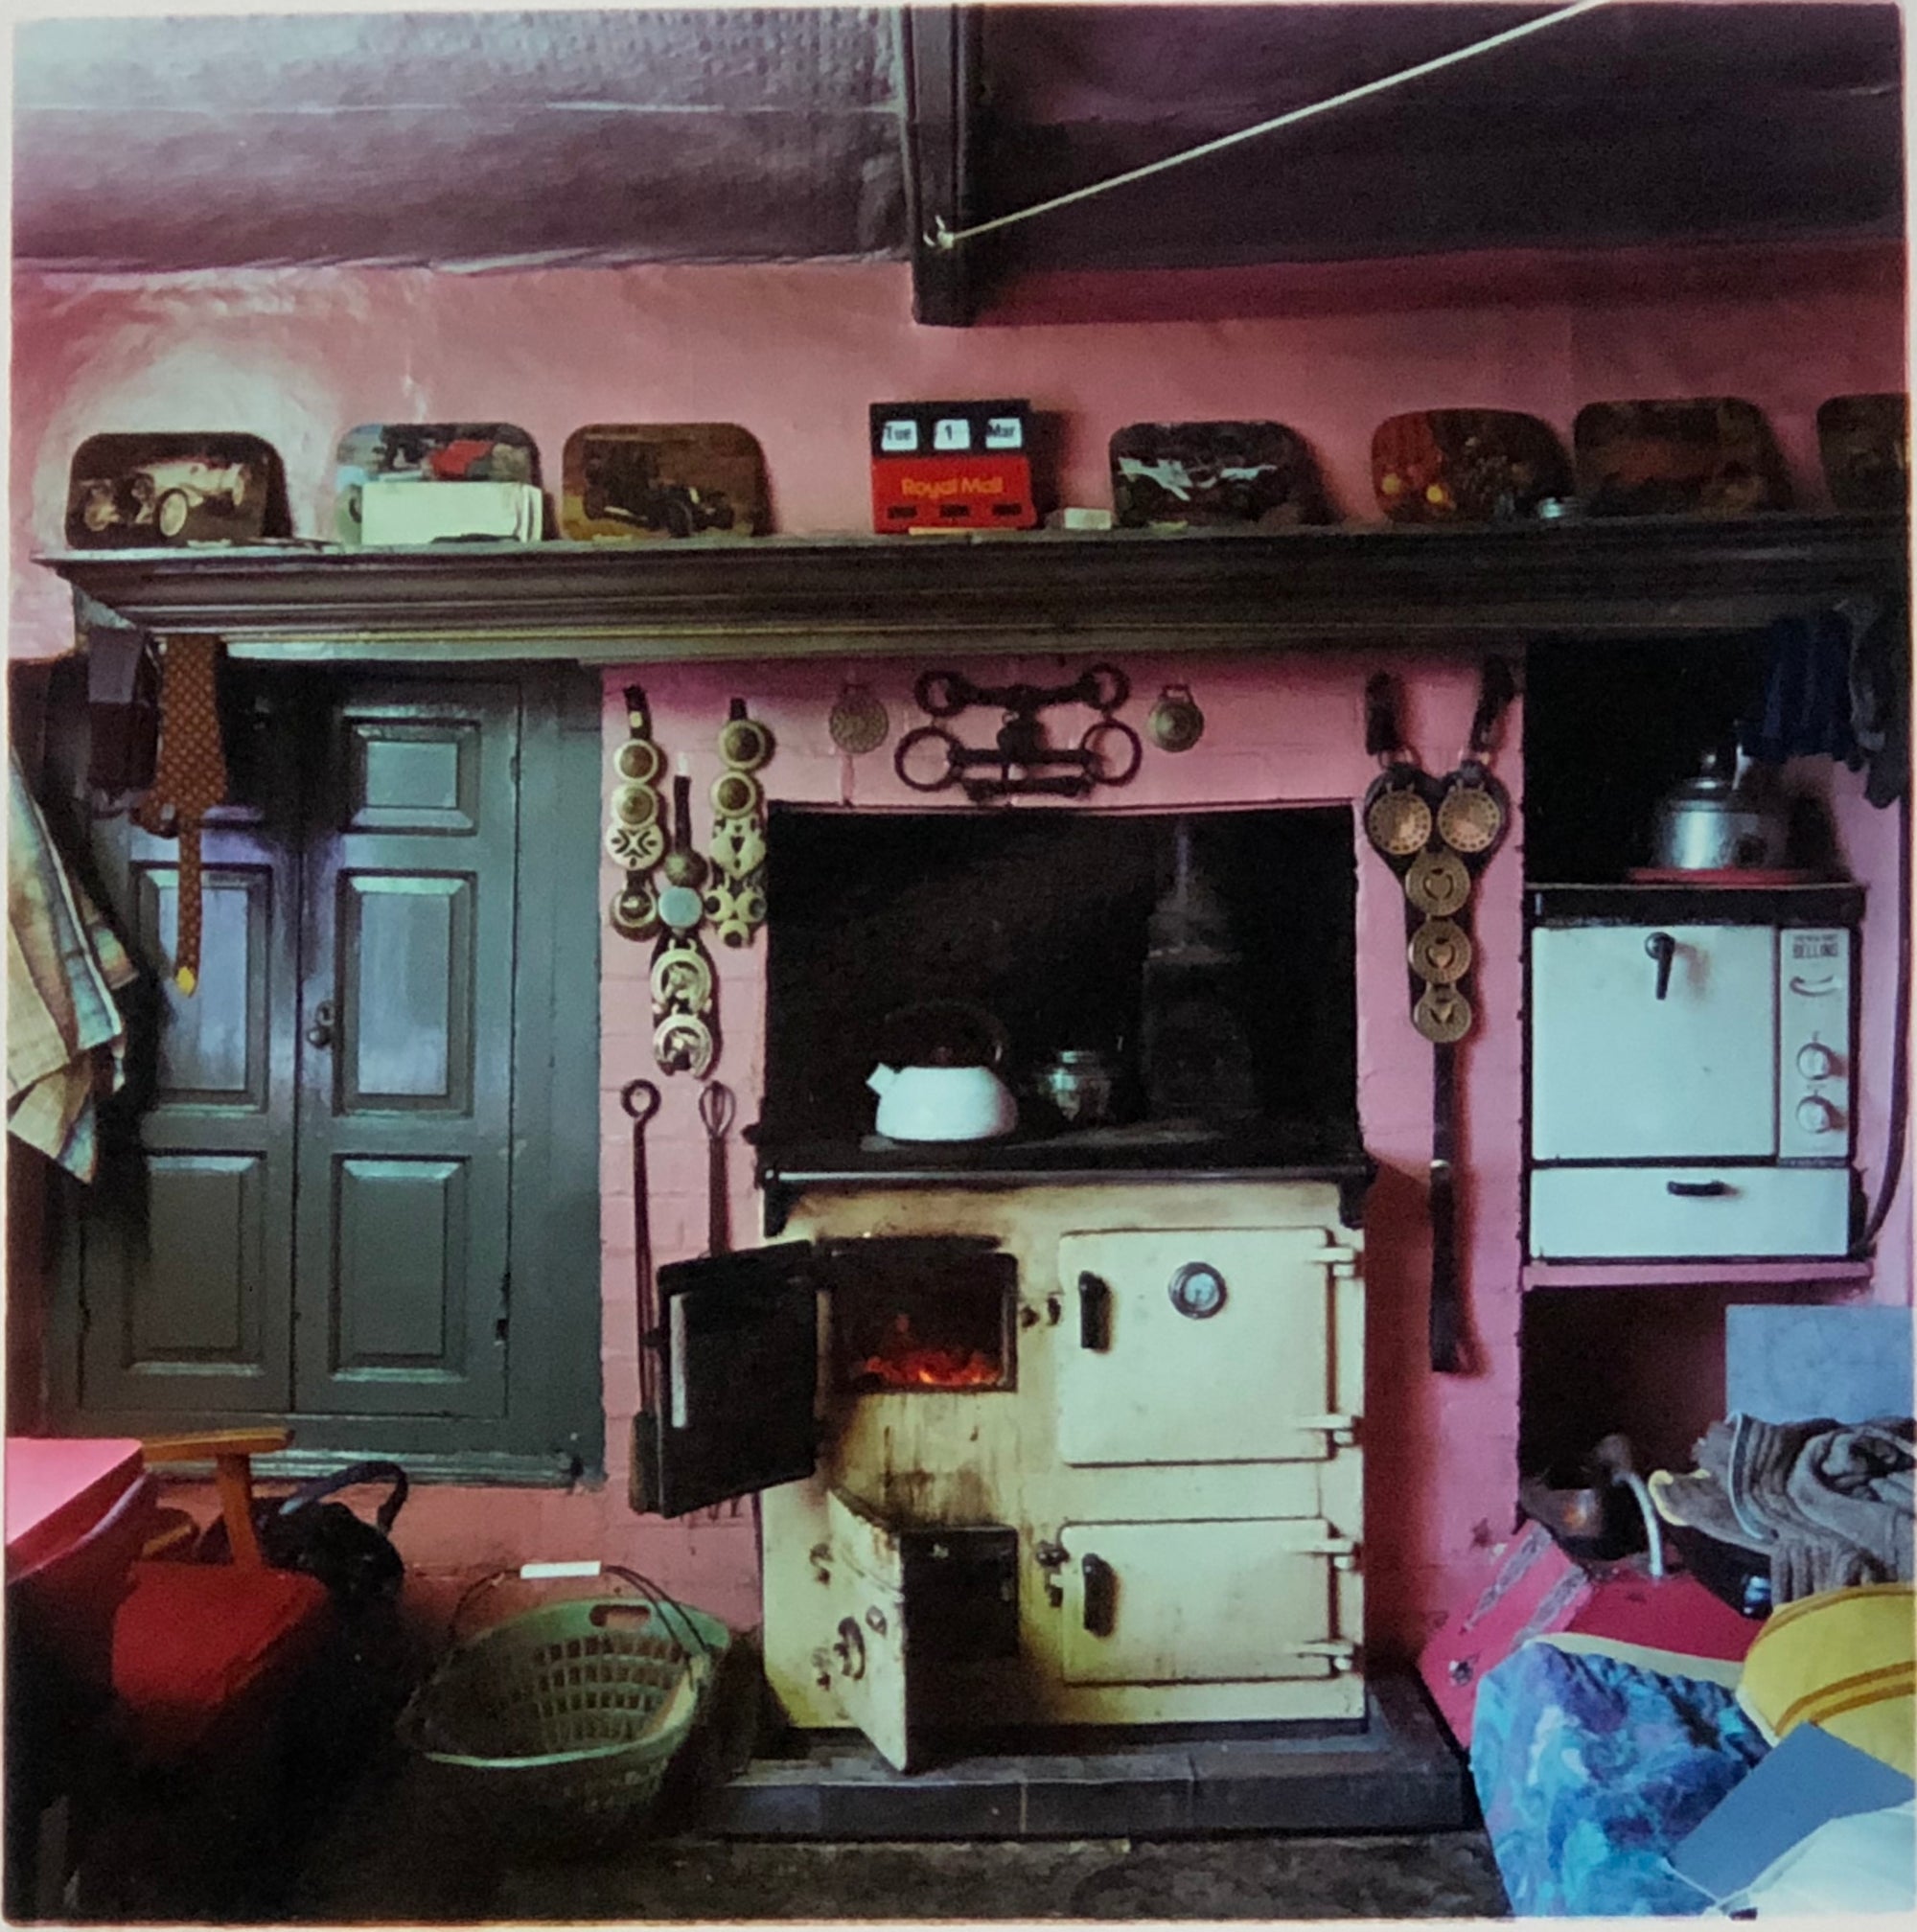 Vintage kitchen interior photography from Richard Heeps Ordinary Places series.